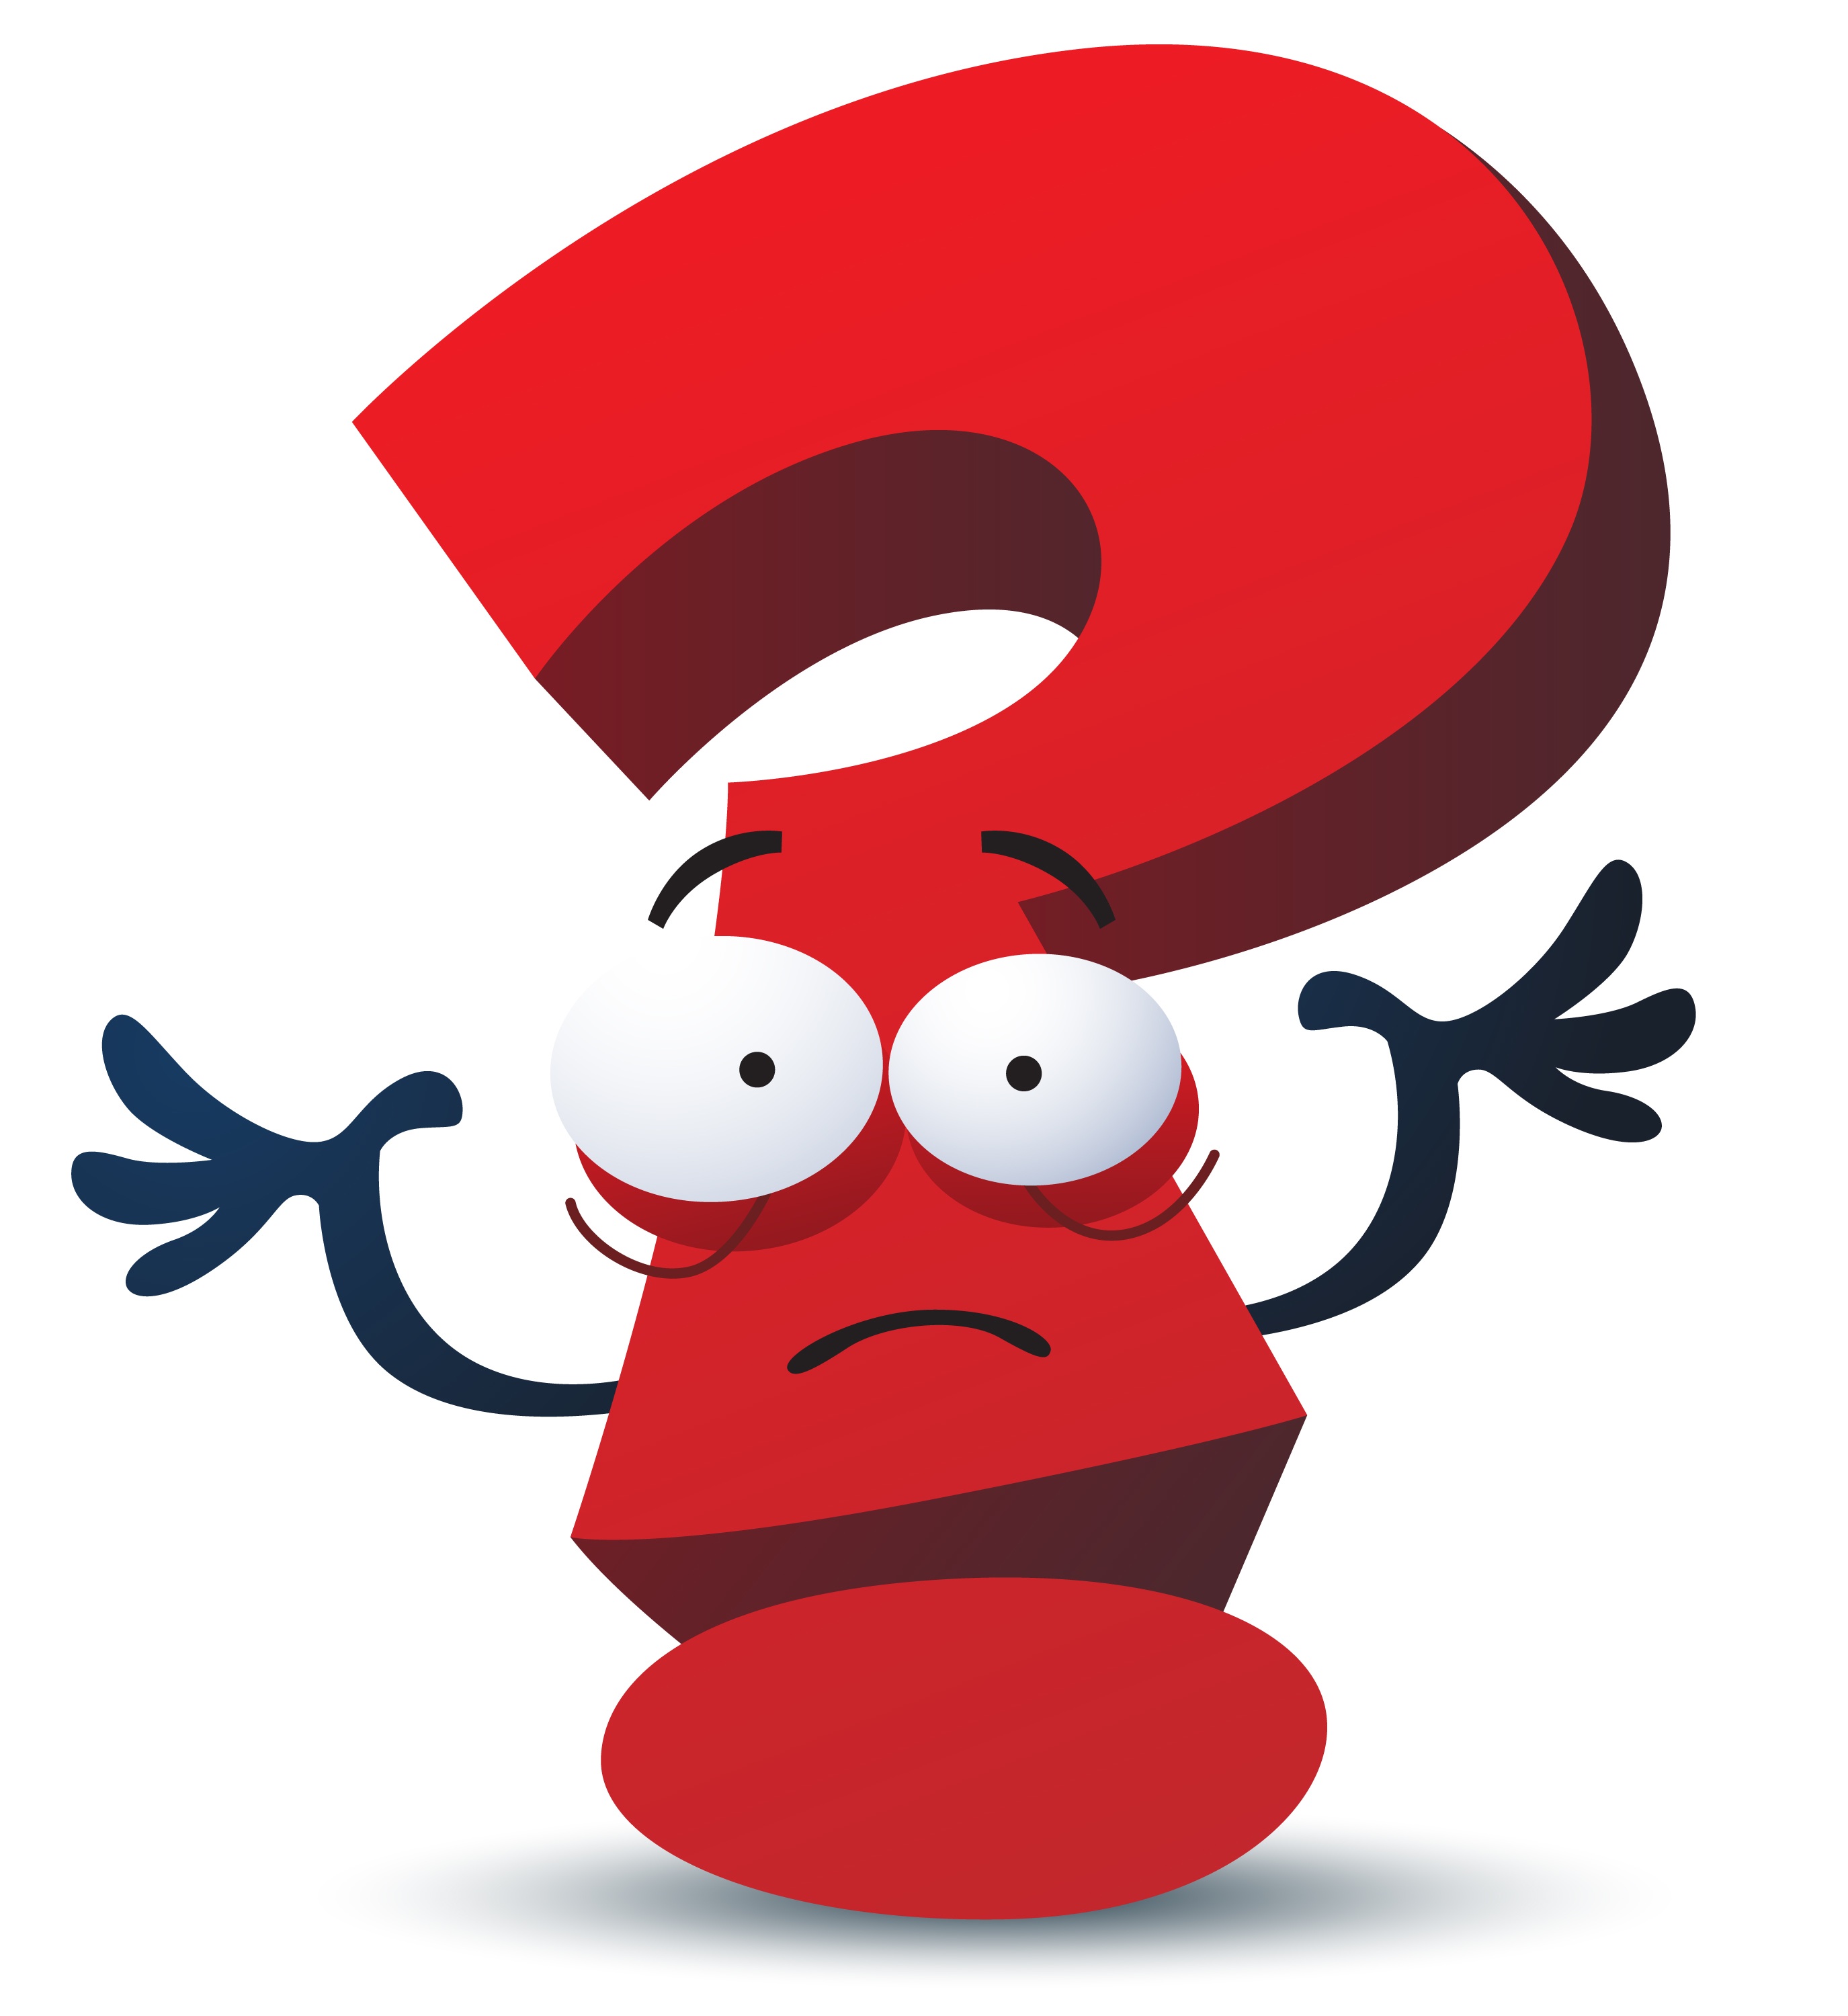 Animated Question Mark | Free Download Clip Art | Free Clip Art ...